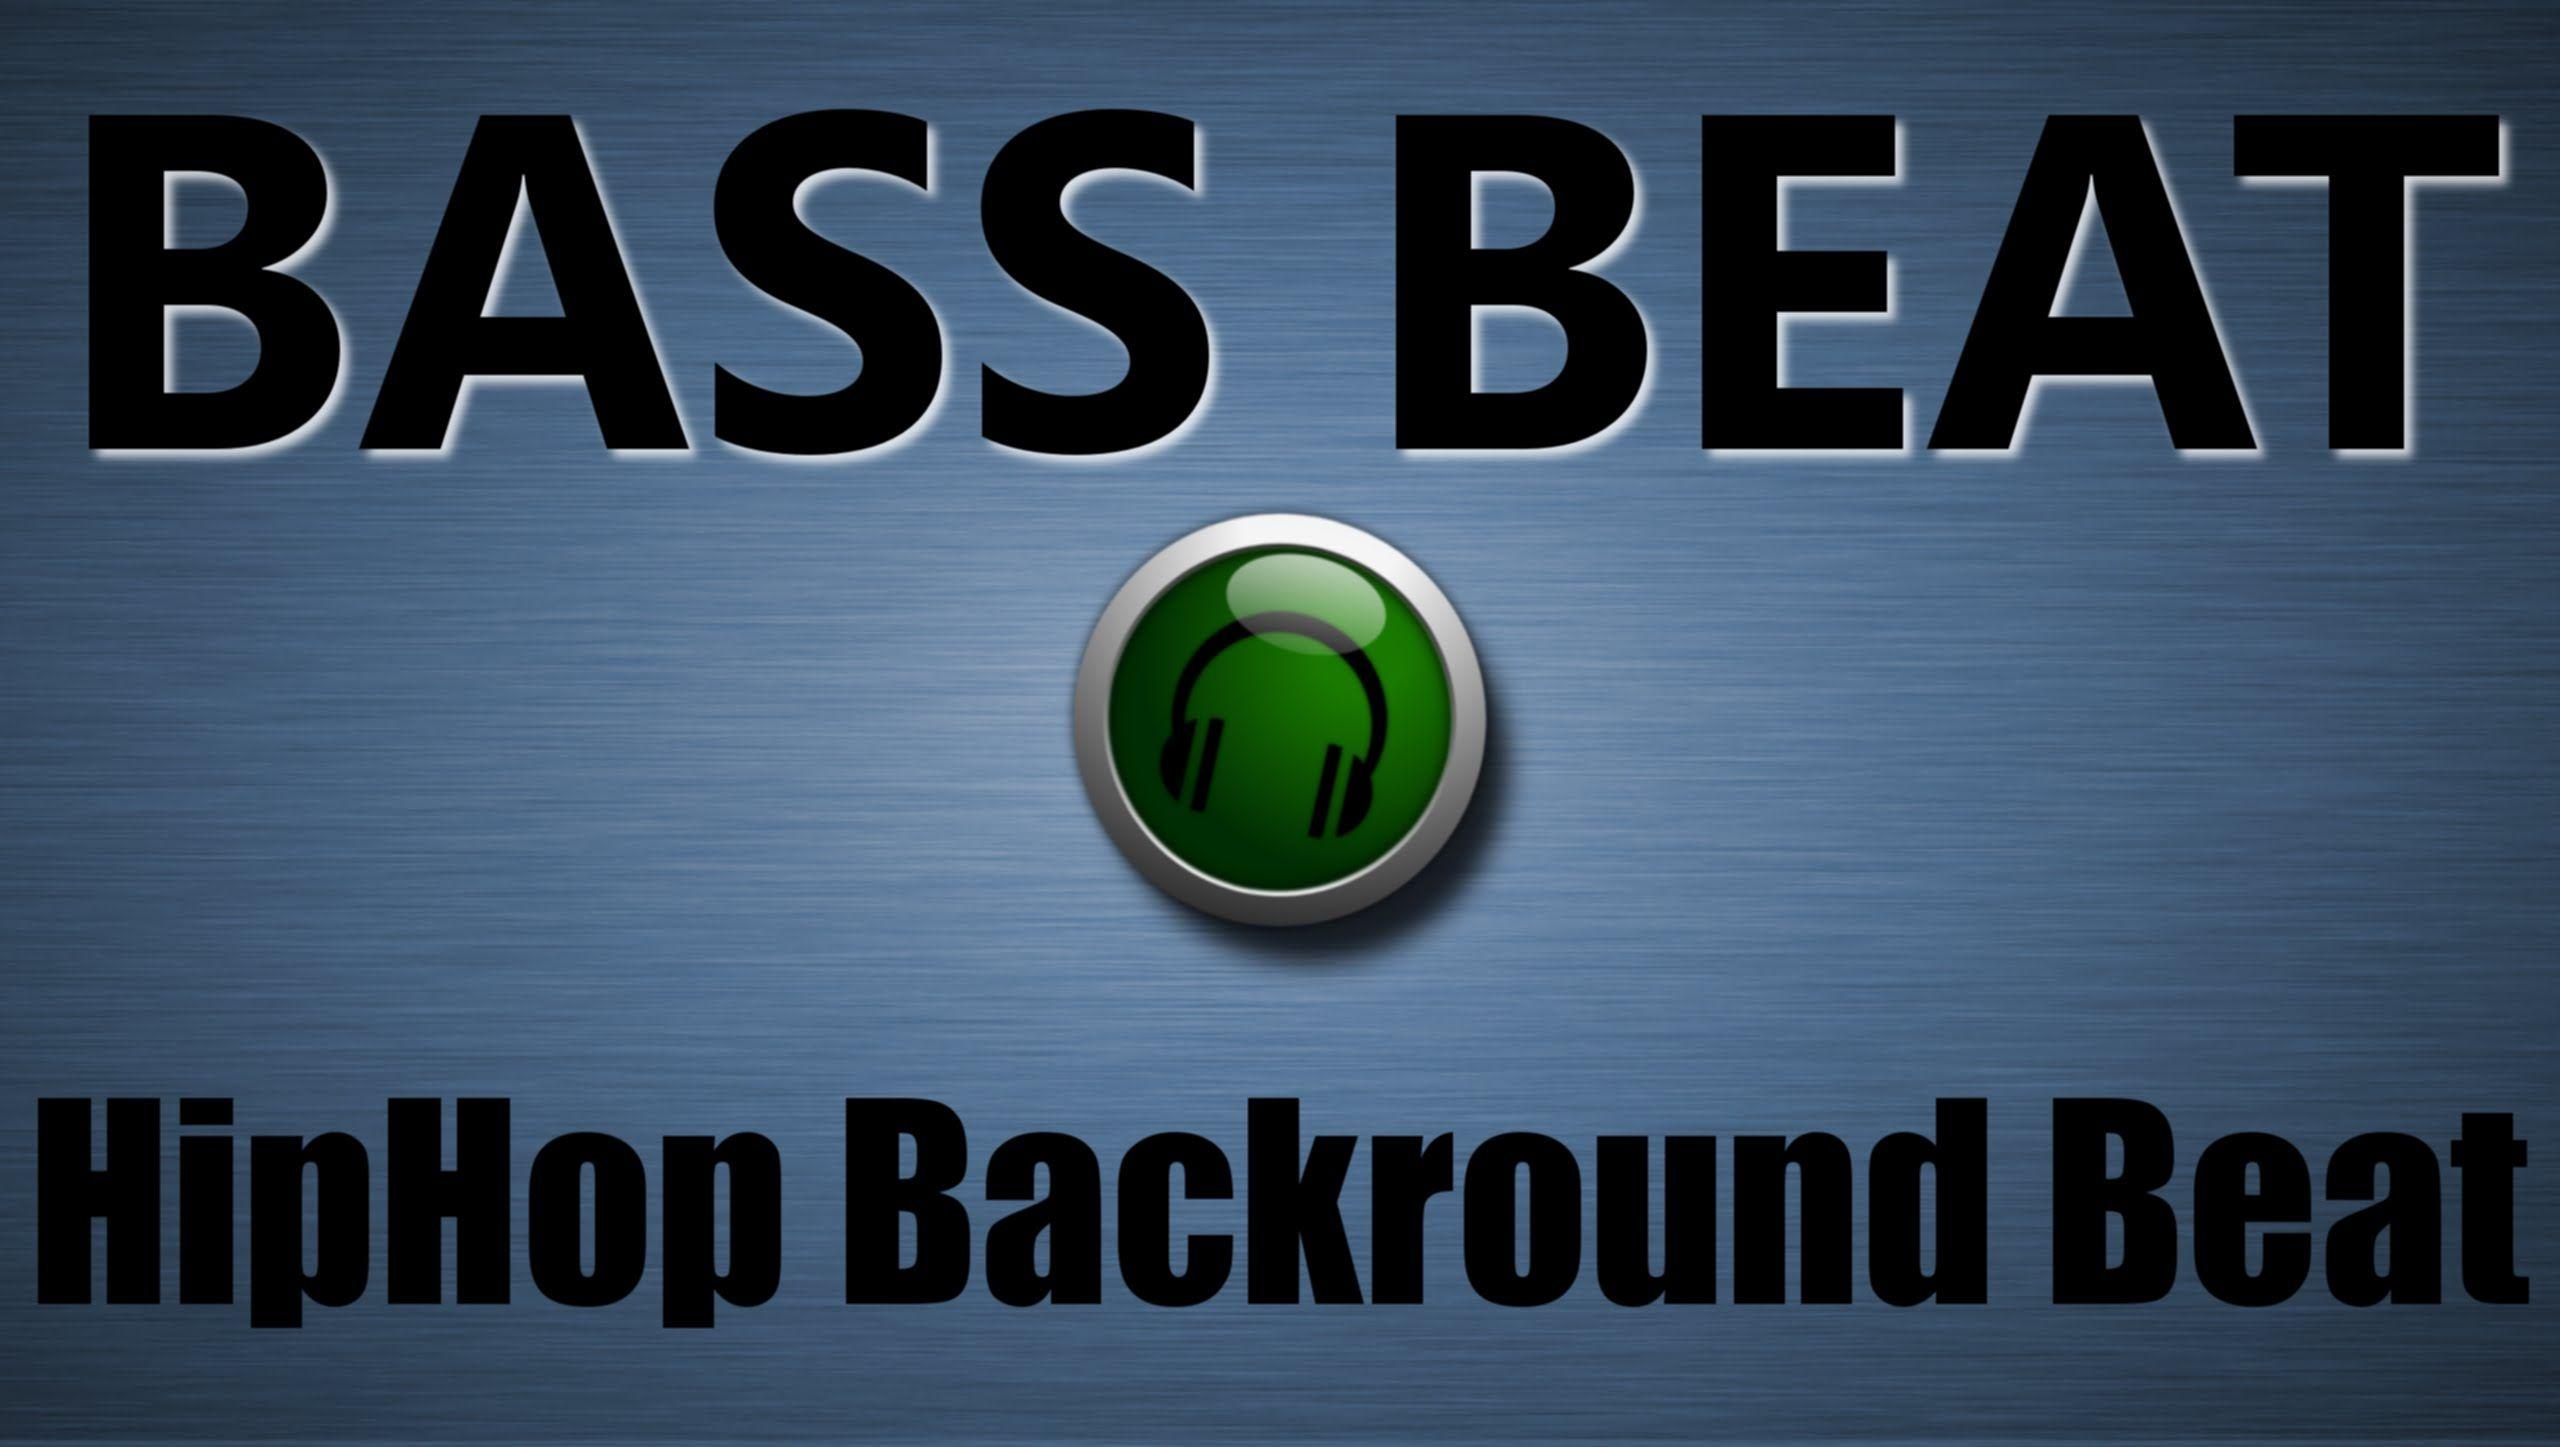 Bass Beat HipHop Background Music